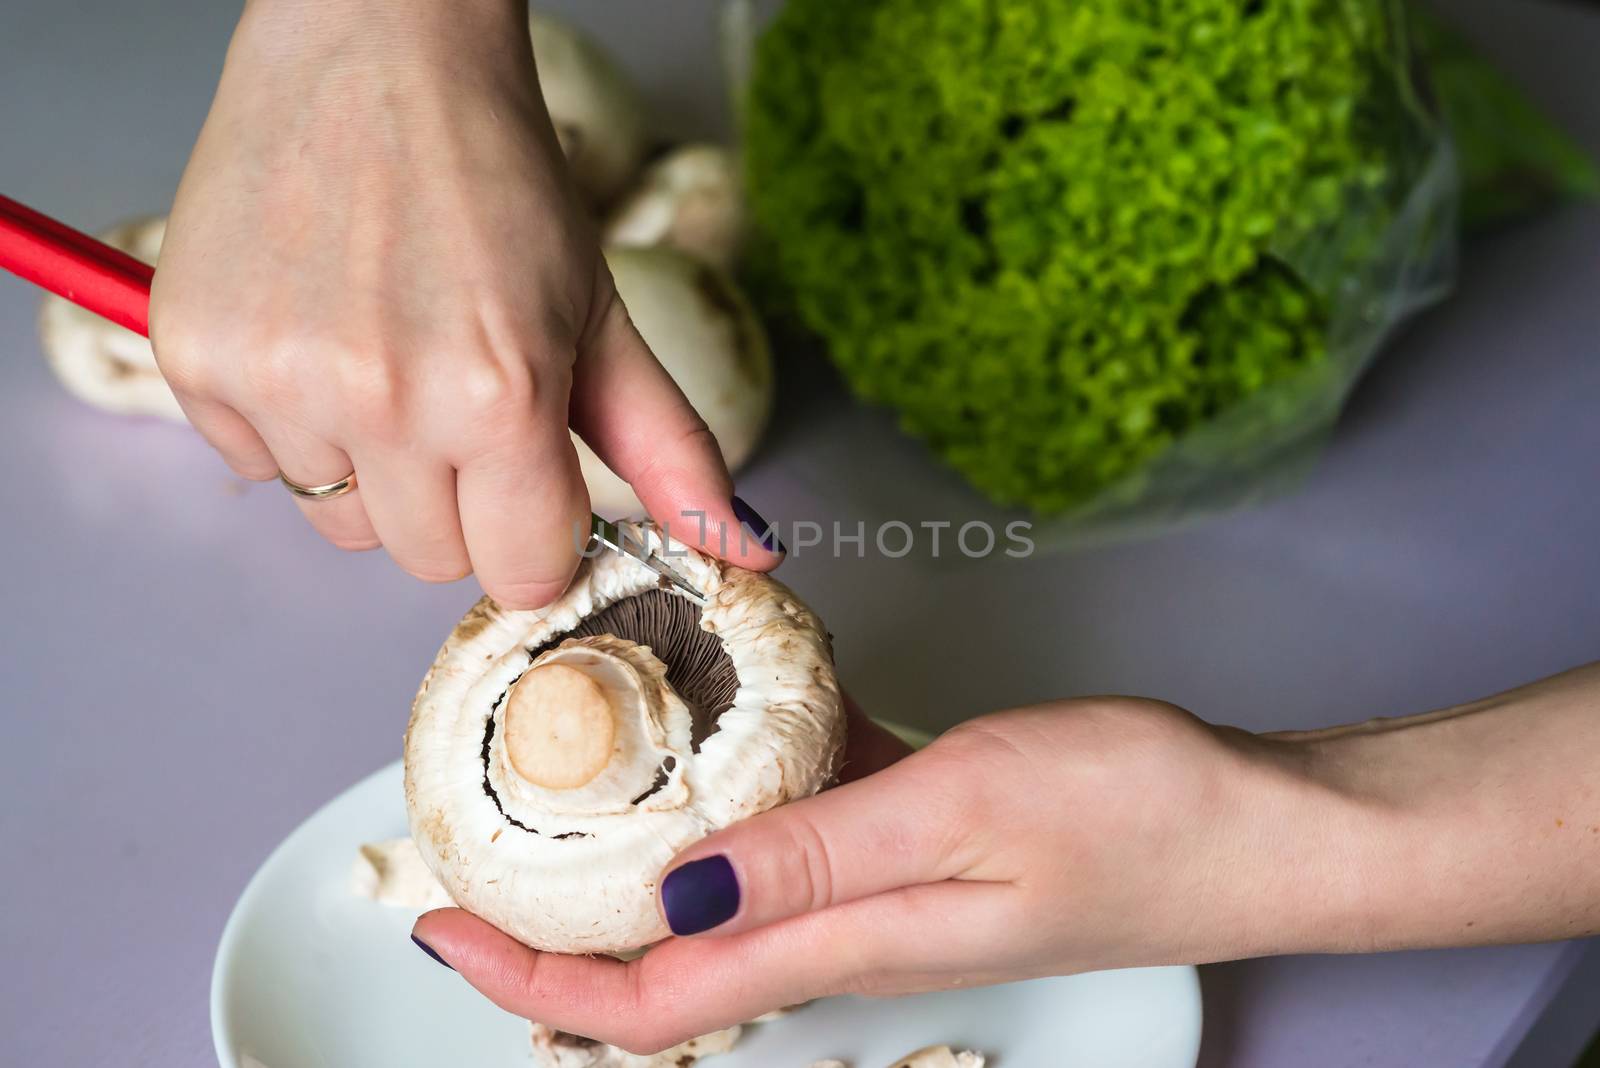 hands clean mushrooms with a knife over a white plate